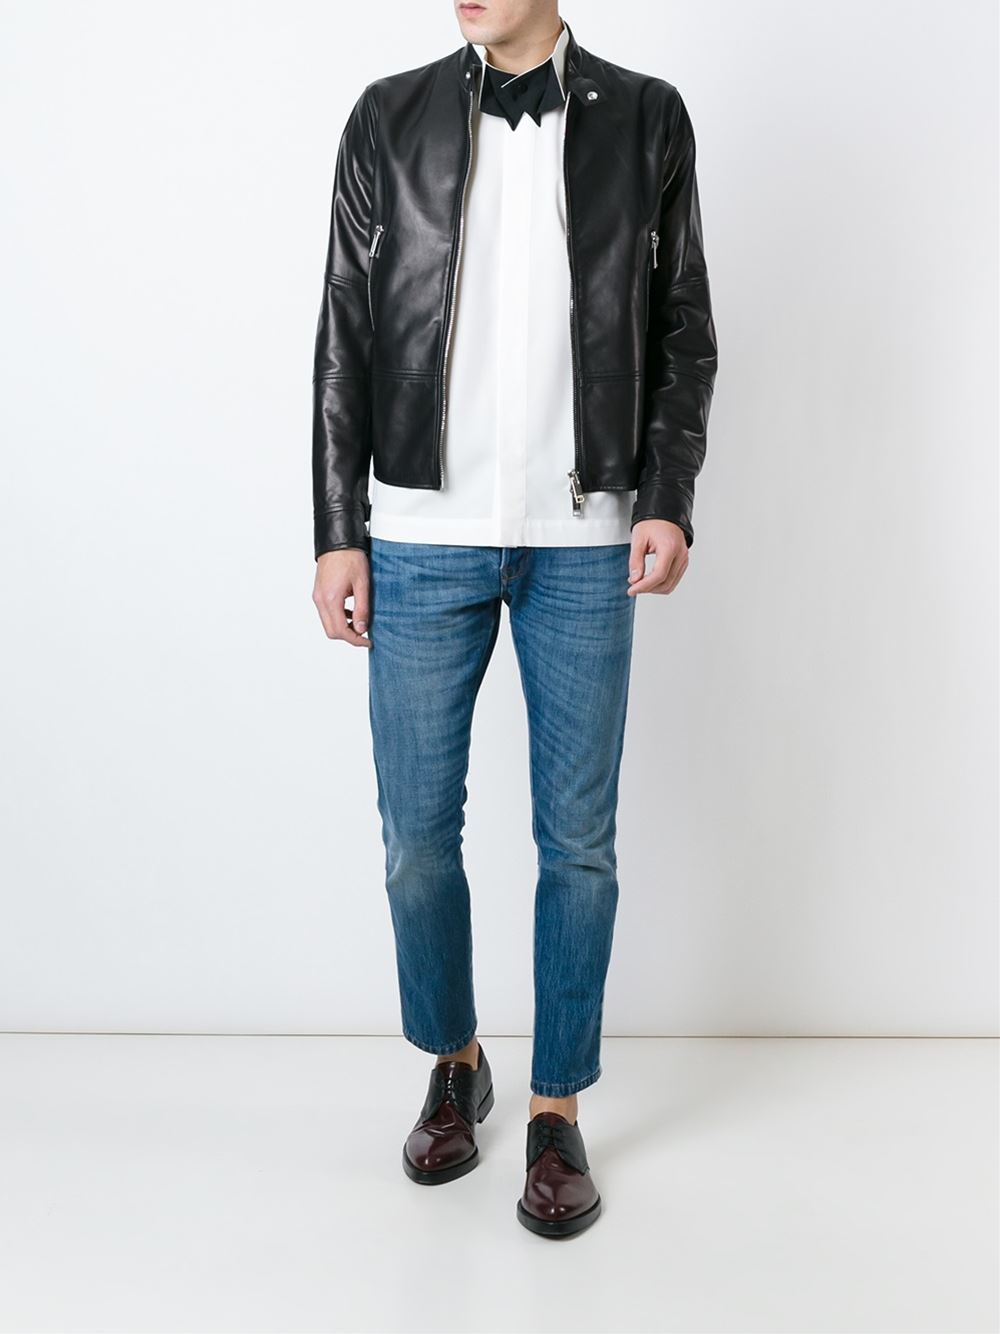 Valentino Leather Jacket in Black for Men - Lyst